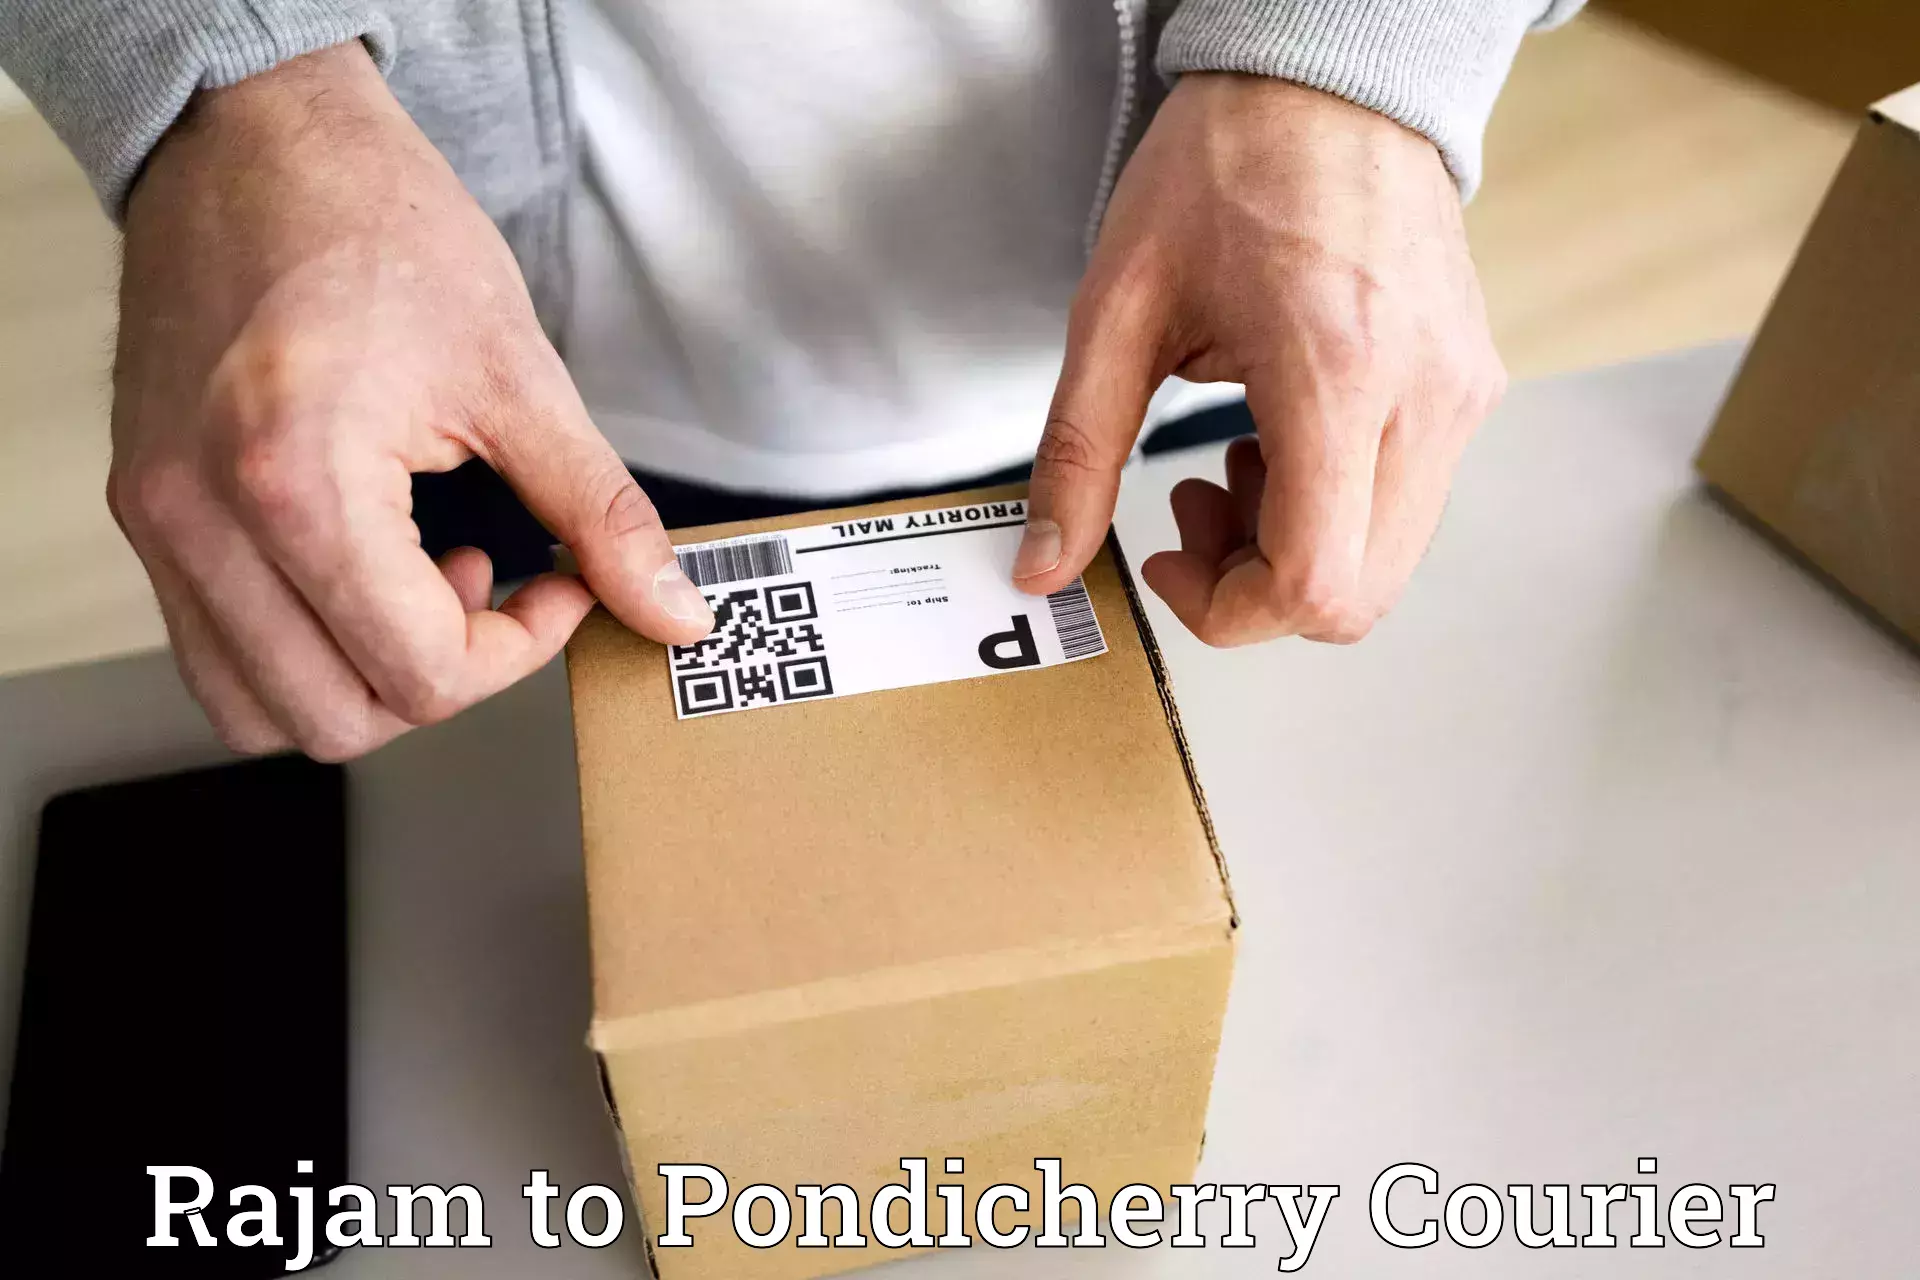 Next-day delivery options in Rajam to Pondicherry